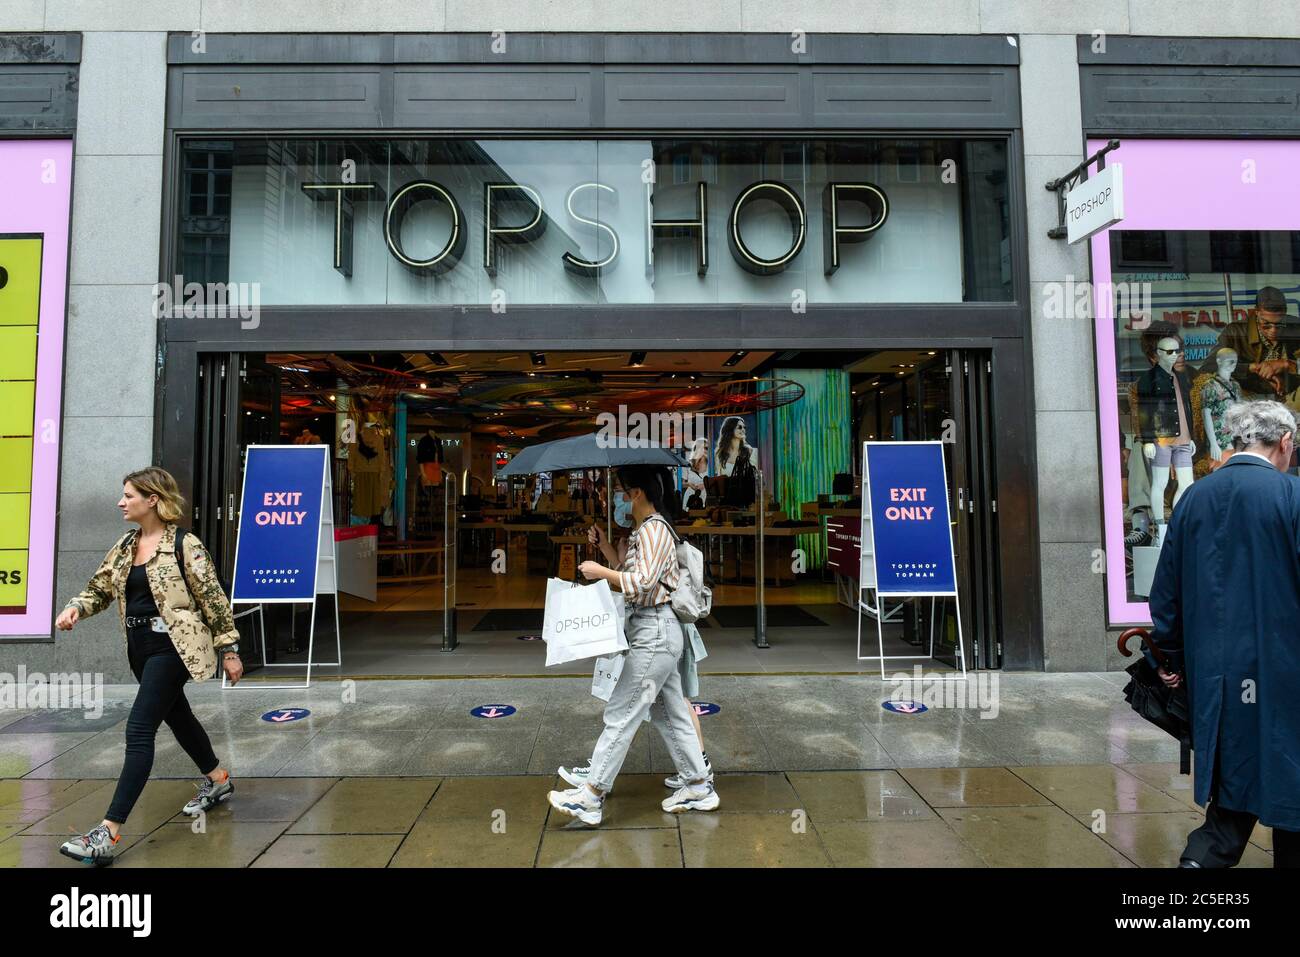 London, UK. 2 July 2020. Exterior of the Topshop flagship store on Oxford  Street. Arcadia Group, owner of Topshop, Burton and Miss Selfridge, has  announced that 500 of its 2,500 head office